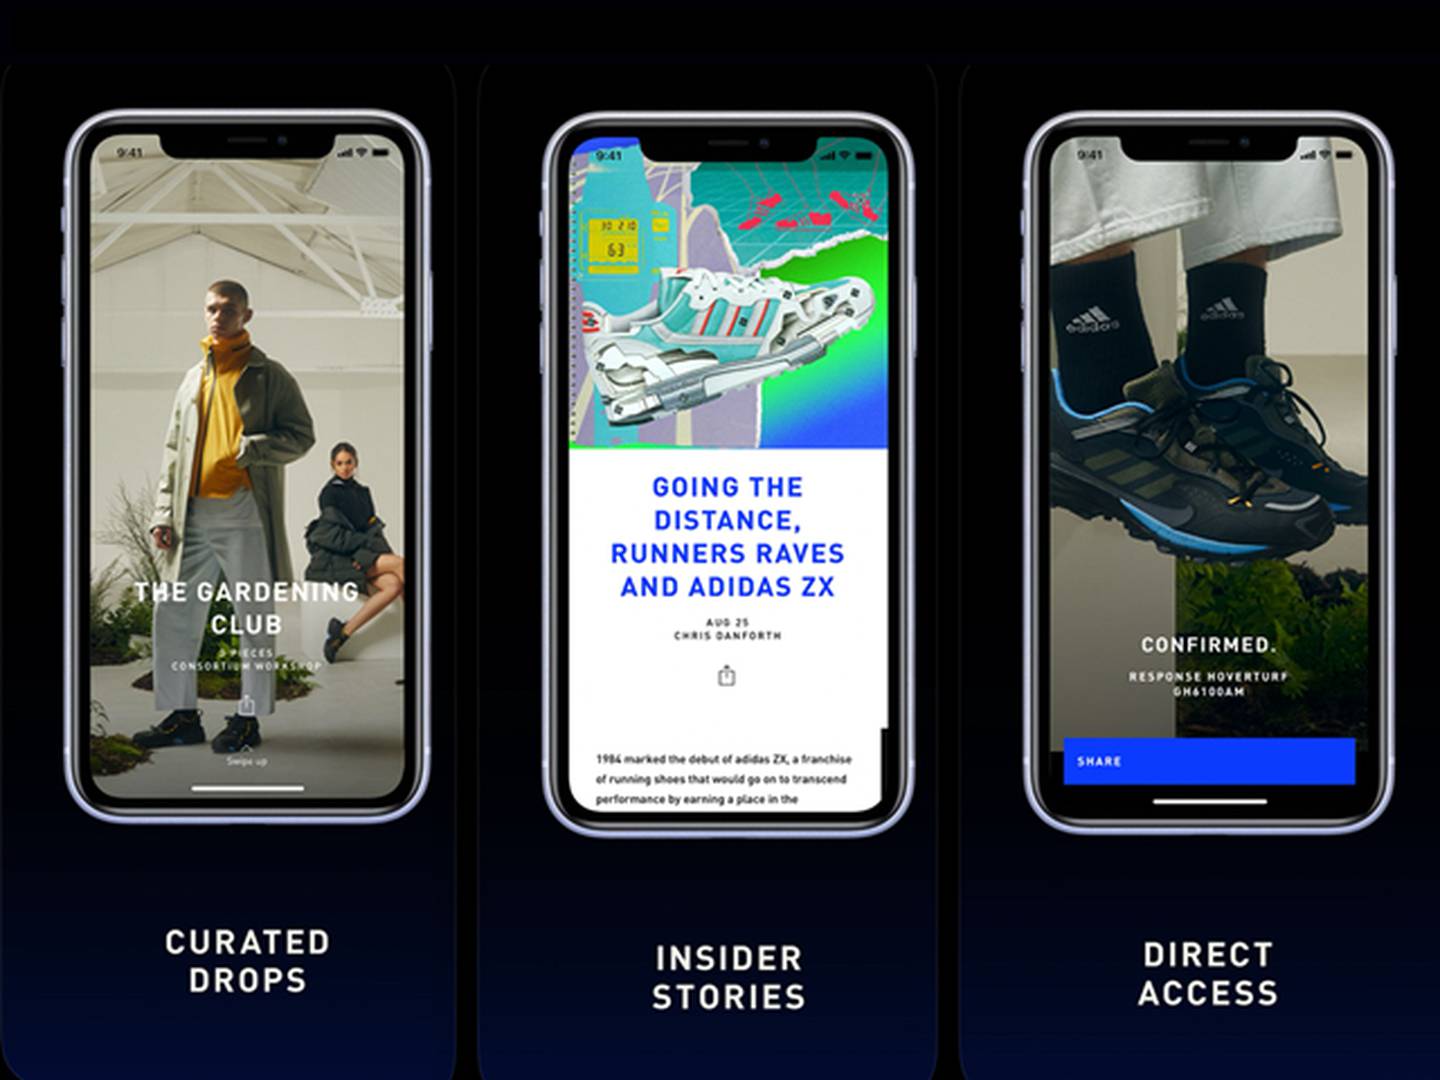 The image shows three different screens on the confirmed app, one highlighting curated drops, another showing insider stories and the last focused on direct access for members.